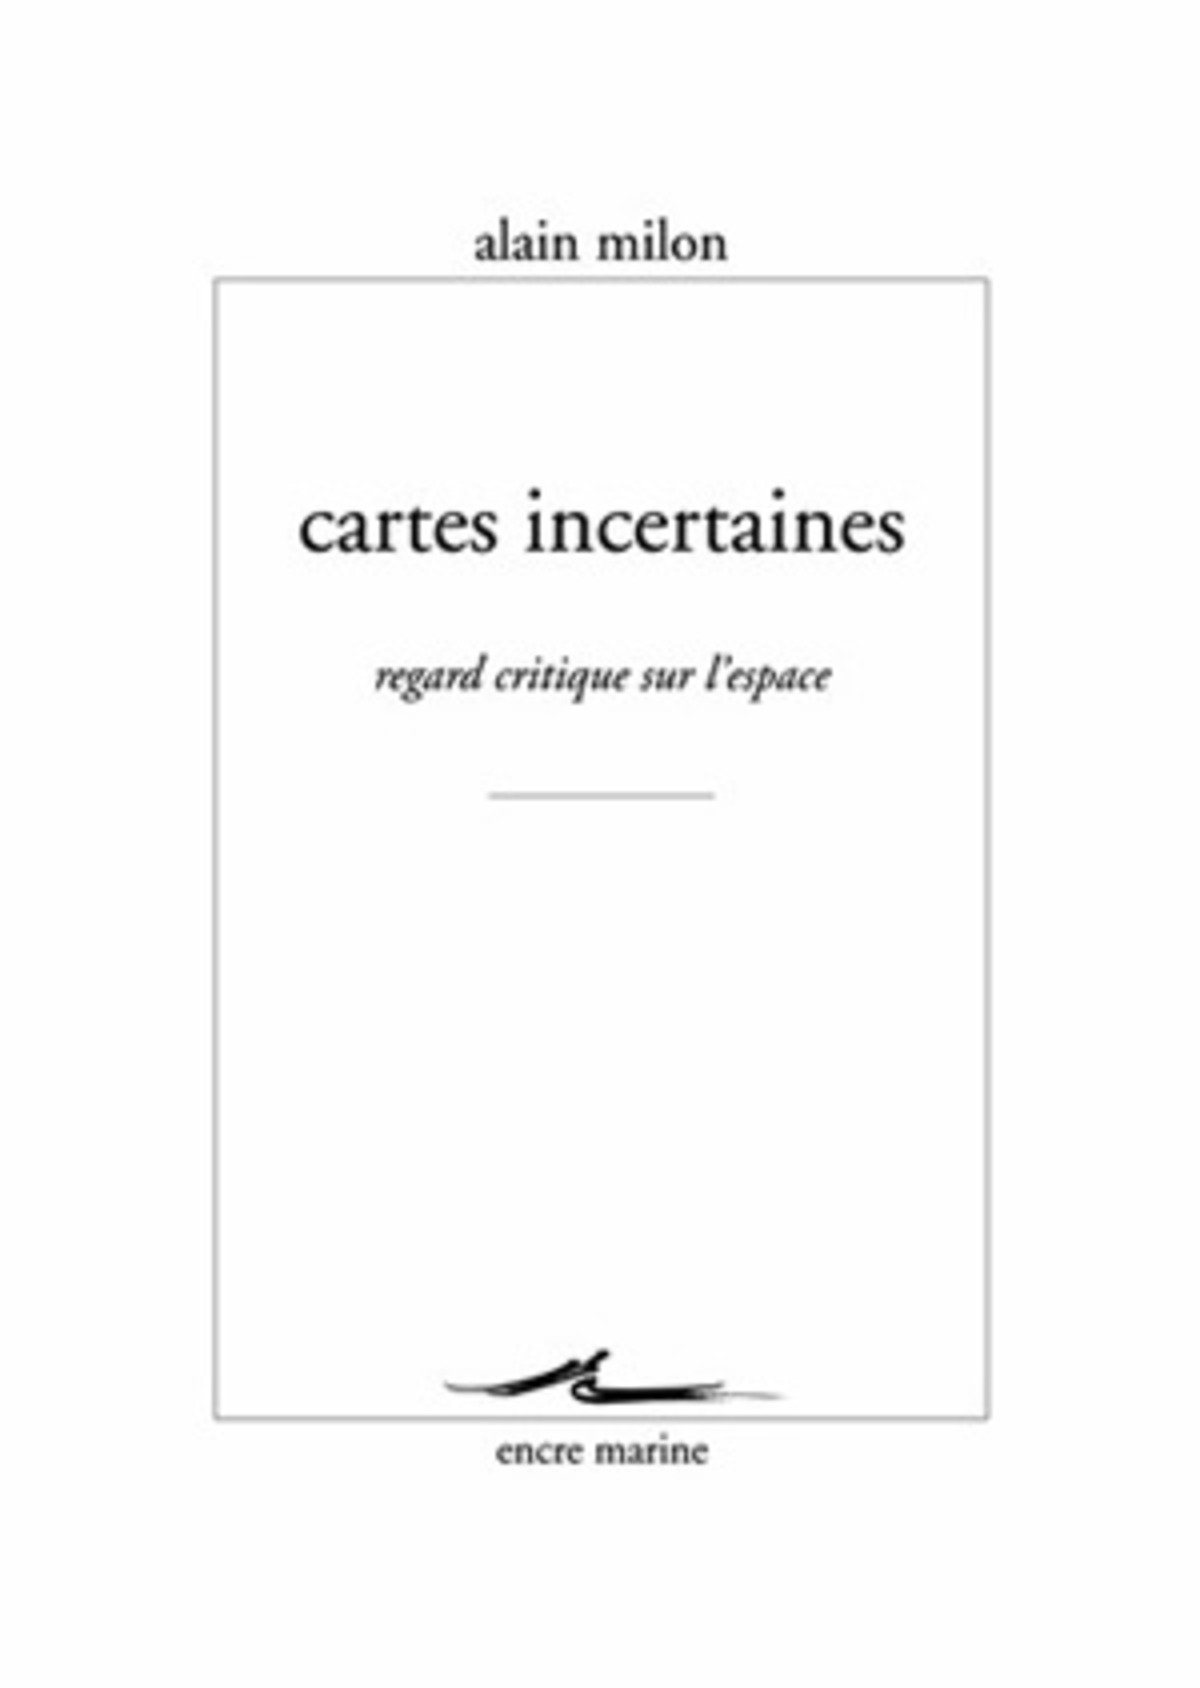 Cartes incertaines